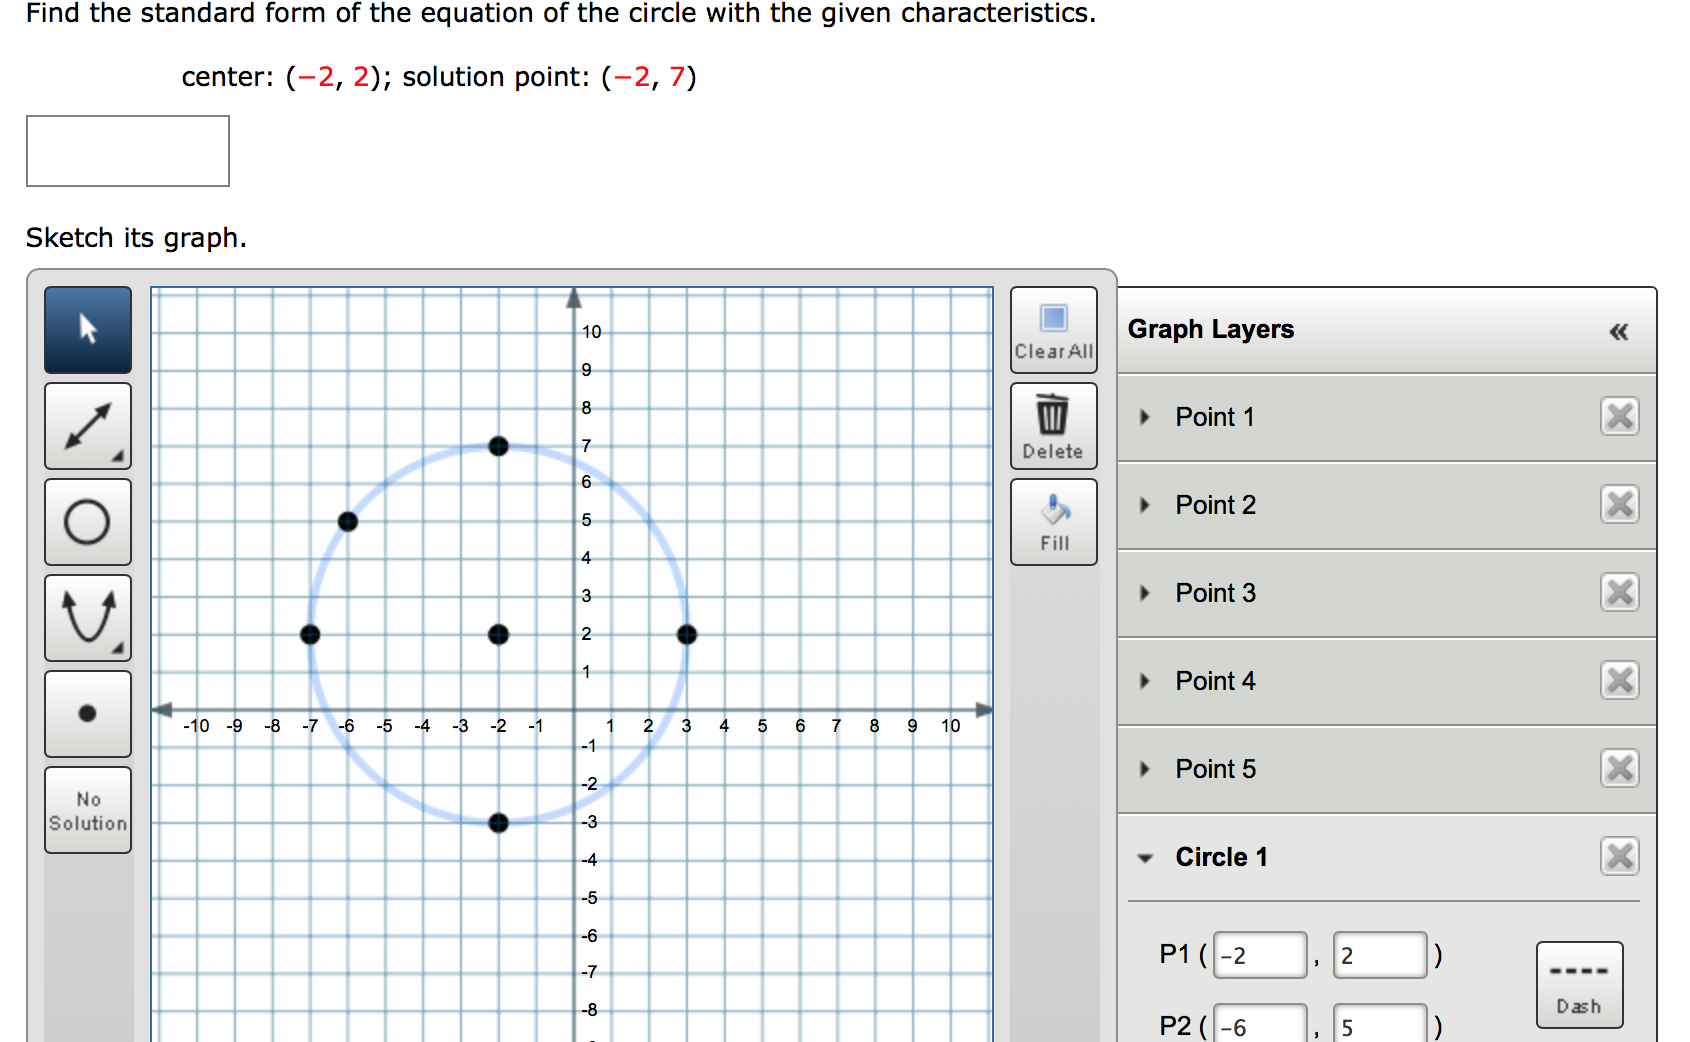 Find the standard form of the equation of the circle with the given characteristics.
center: (-2, 2); solution point: (-2, 7)
Sketch its graph.
10
Graph Layers
«
Clear All
9
8
Point 1
Delete
Point 2
5
Fill
4
3
Point 3
2
Point 4
-10 -9
-8 -7
-6 -5
-4 -3
-2 -1
1
-1
2
3
4
6
10
Point 5
-2
No
Solution
-3
-4
Circle 1
-5
-6
P1 (-2
2
-7
-8
Dash
P2 (-6
